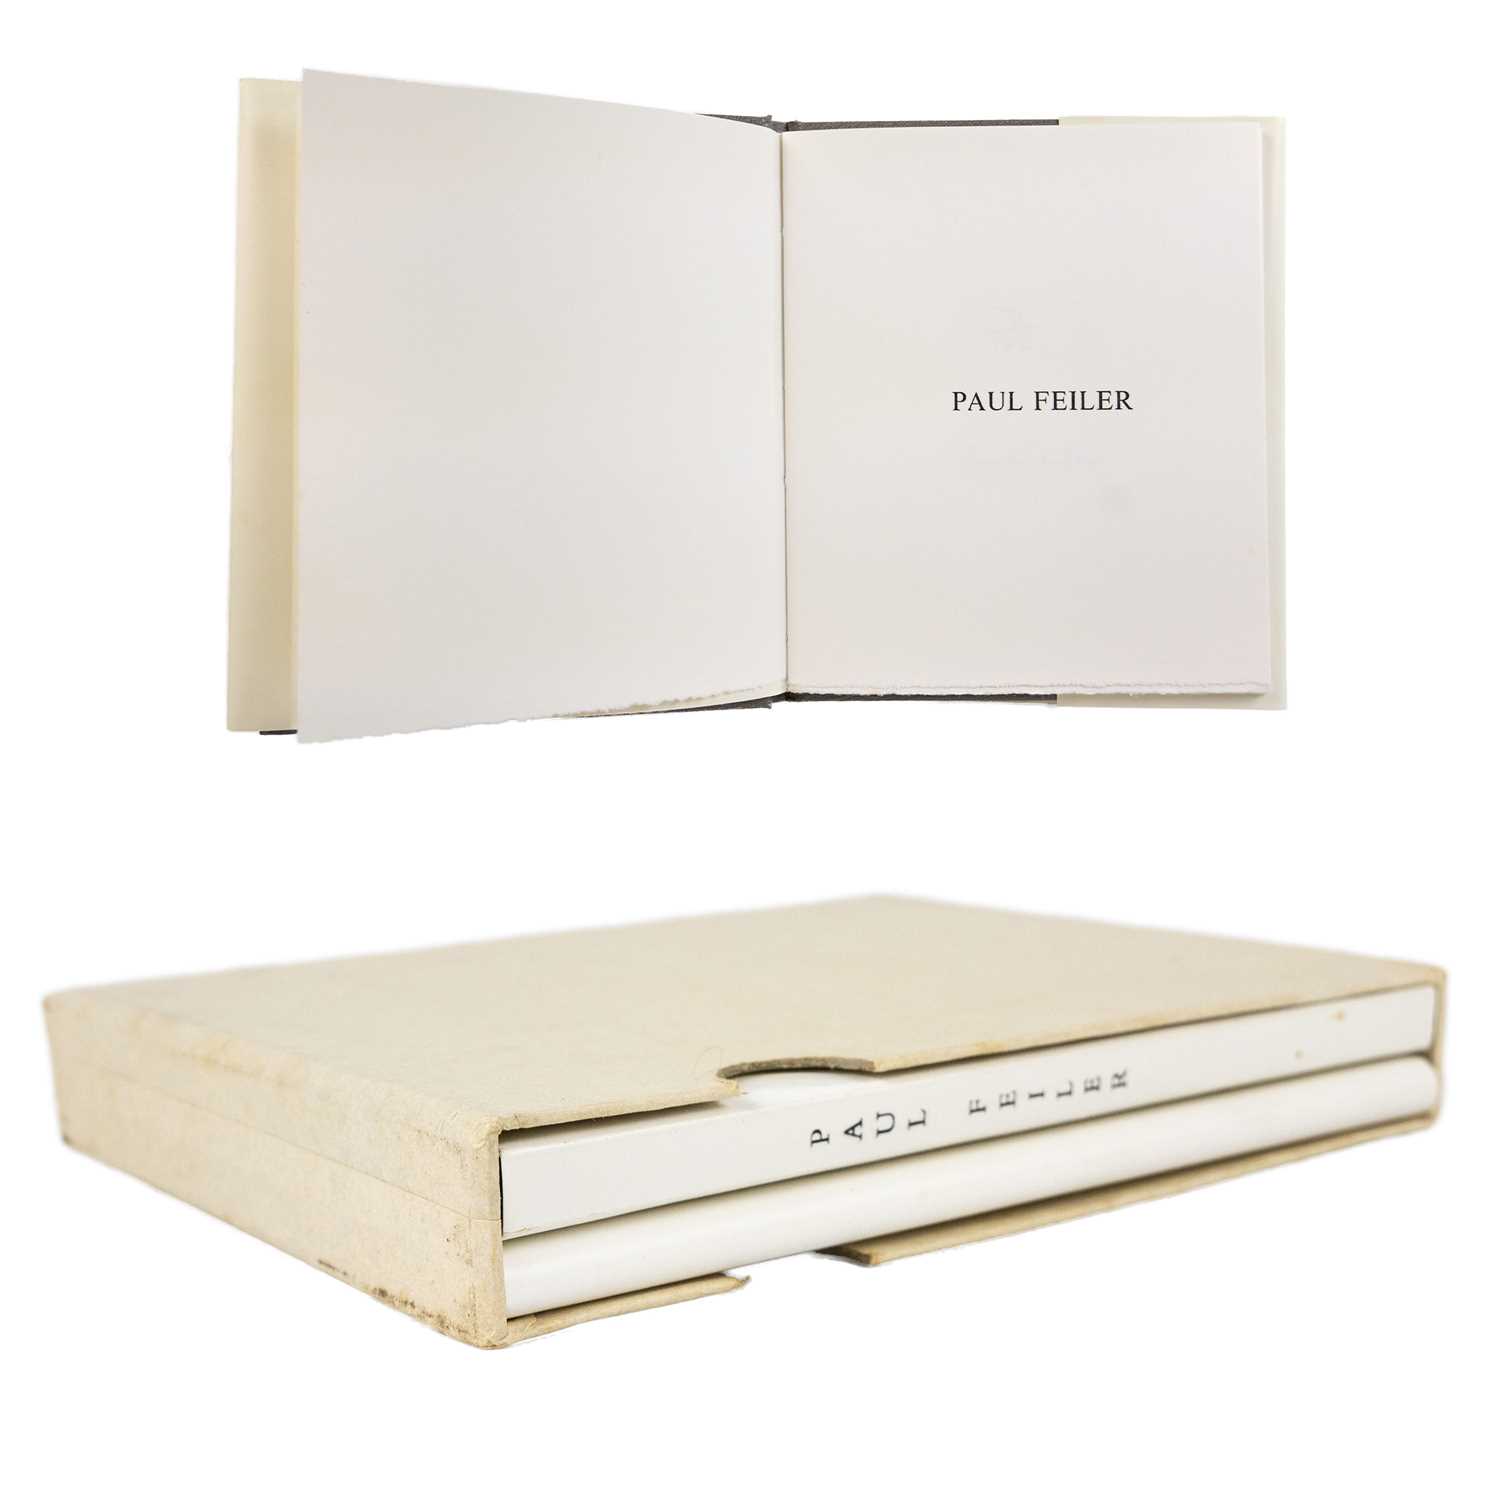 'Paul Feiler' published by Andrew Lanyon (1990) signed and numbered 73/150 by Paul Feiler,